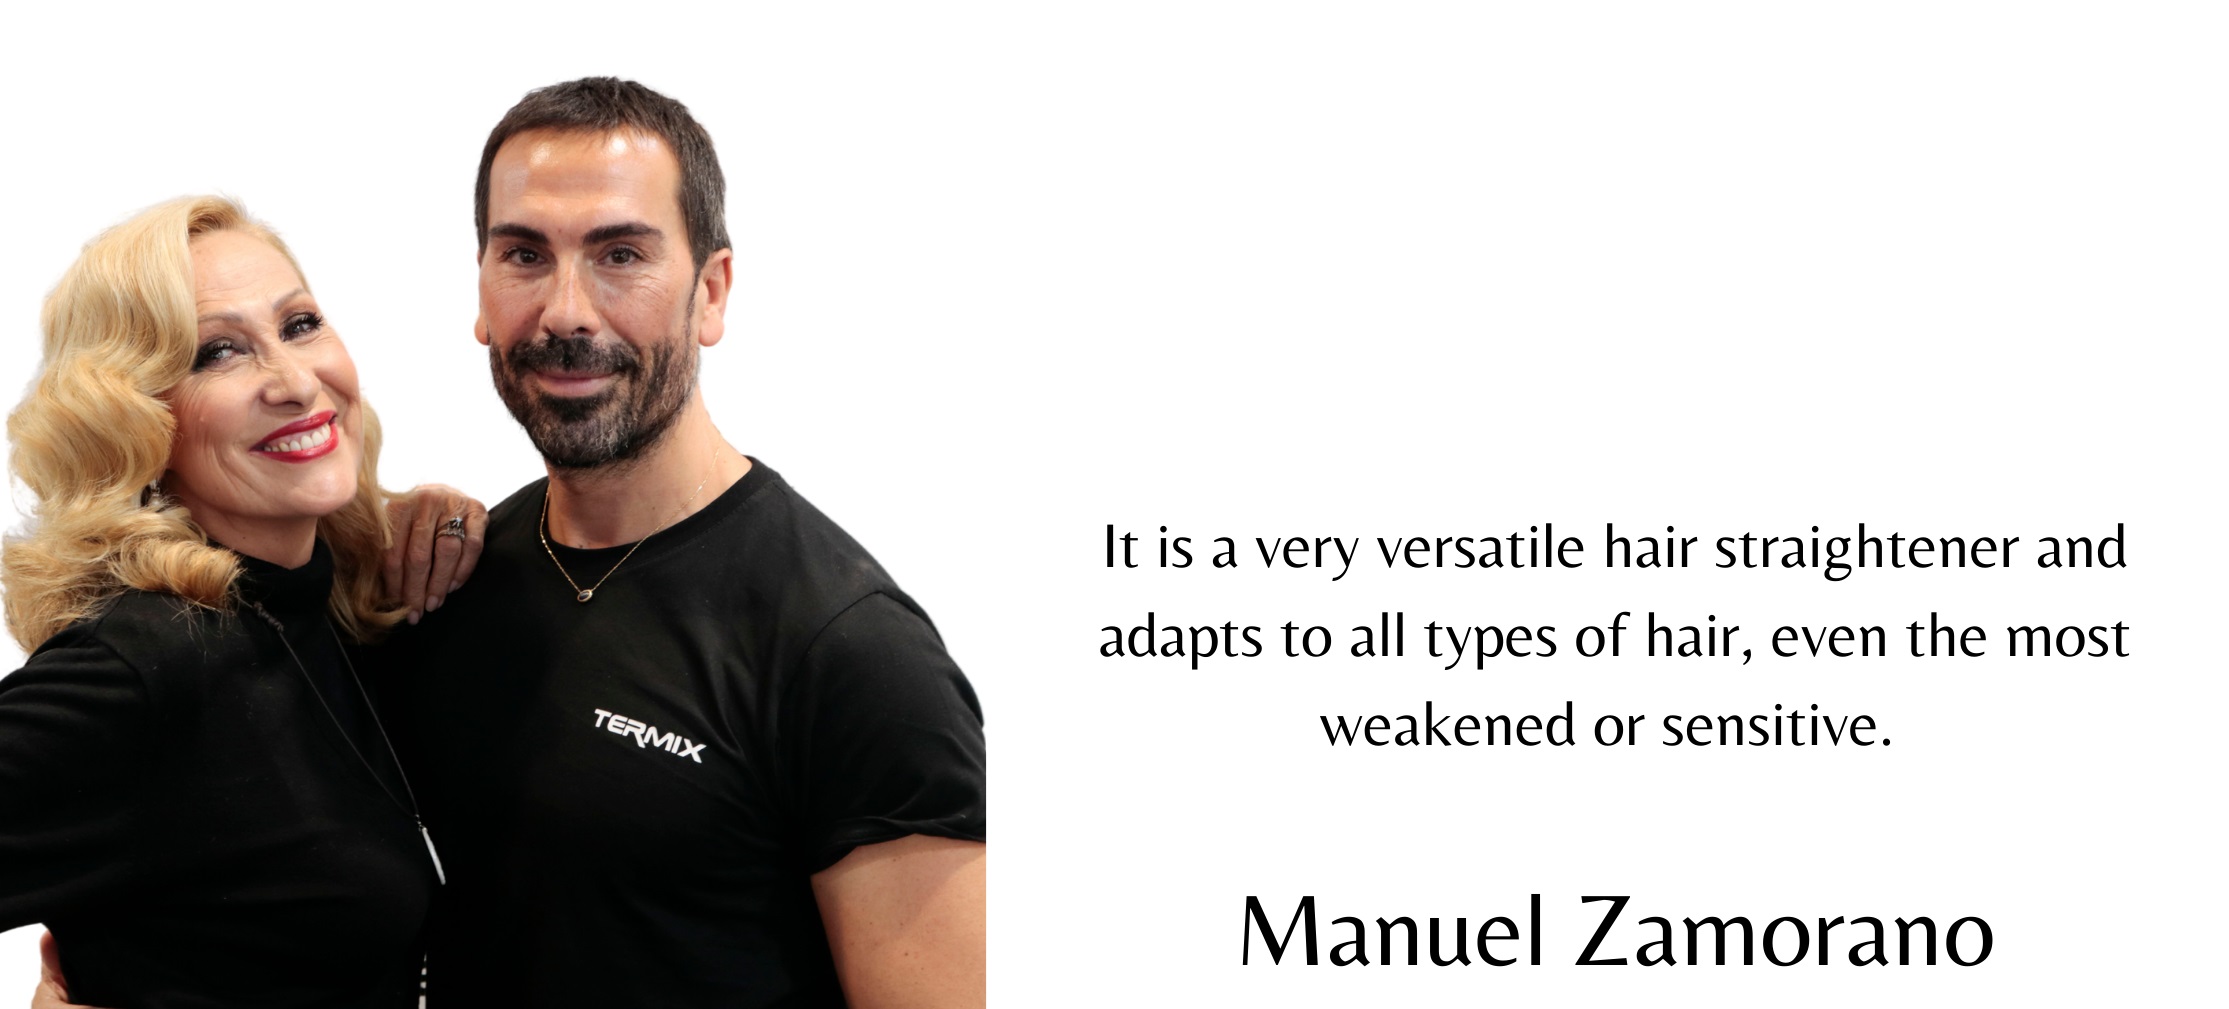 Manuel zamorano about the Termix Wild hair straightener